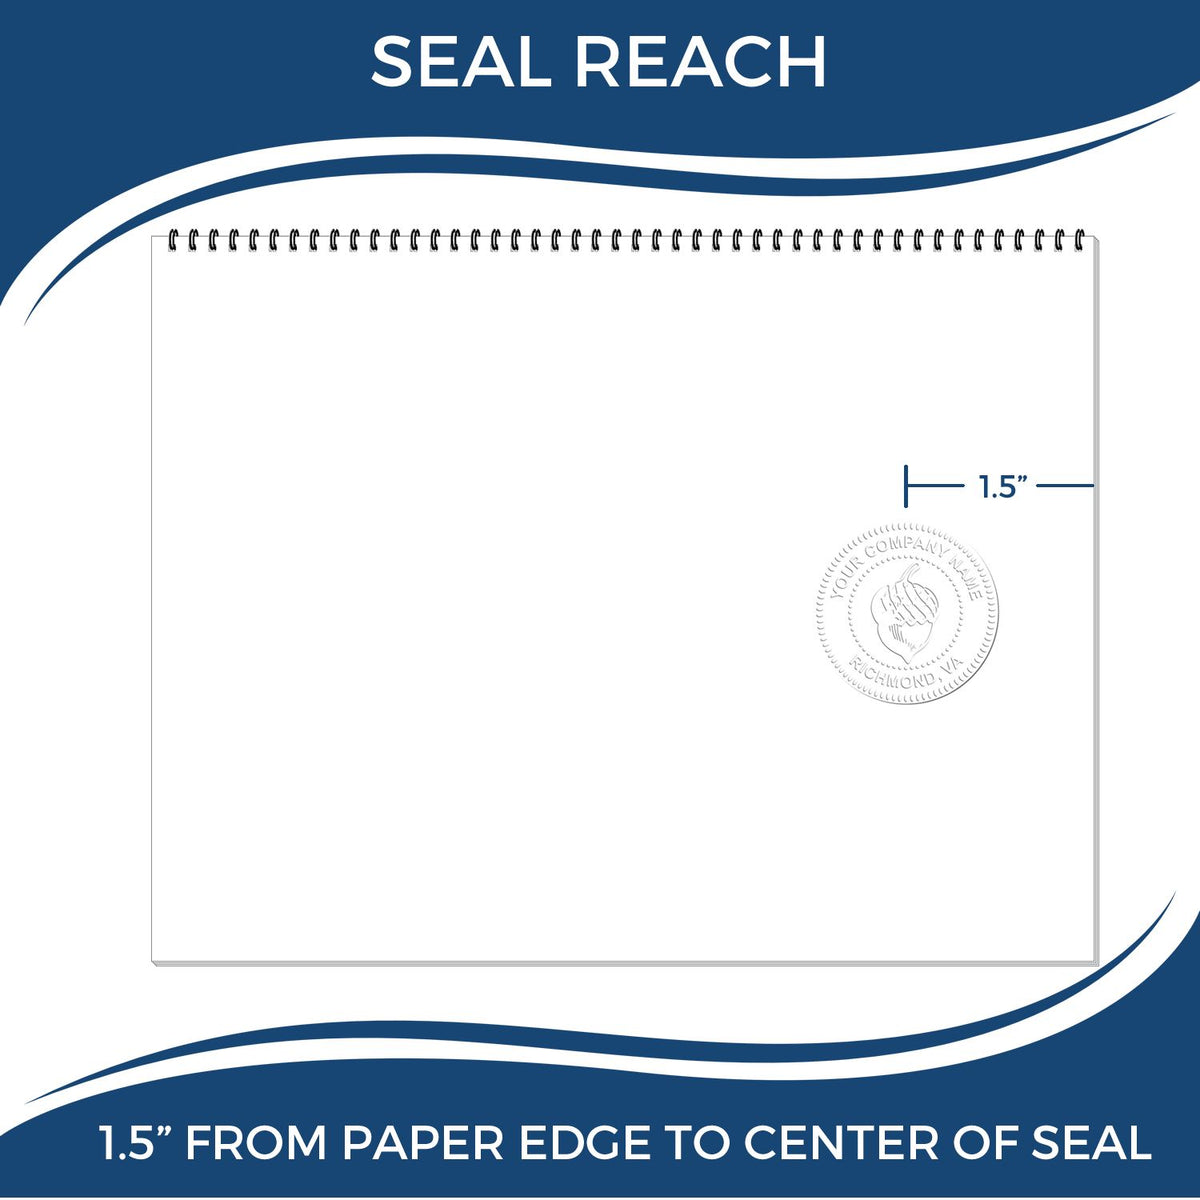 An infographic showing the seal reach which is represented by a ruler and a miniature seal image of the Gift Nevada Engineer Seal